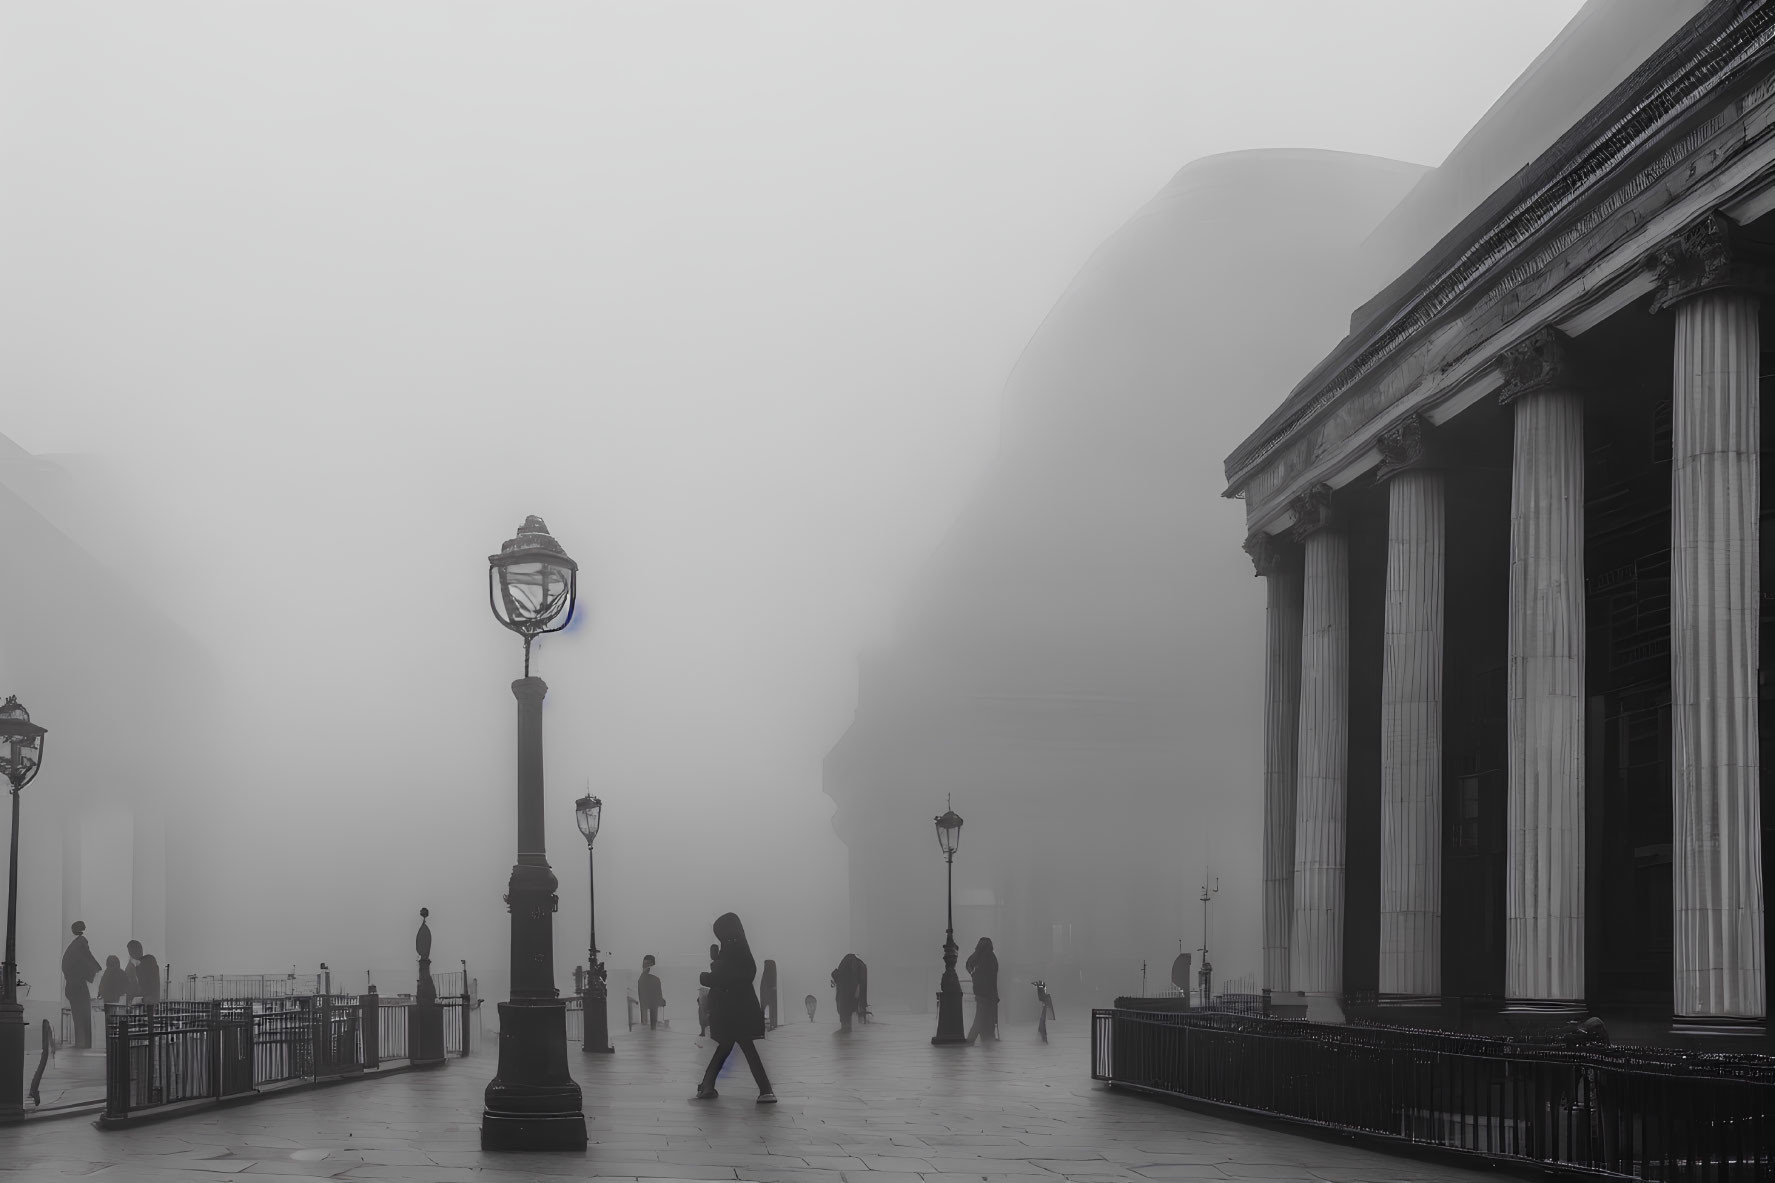 Misty urban scene with vintage street lamps and classic architecture in fog